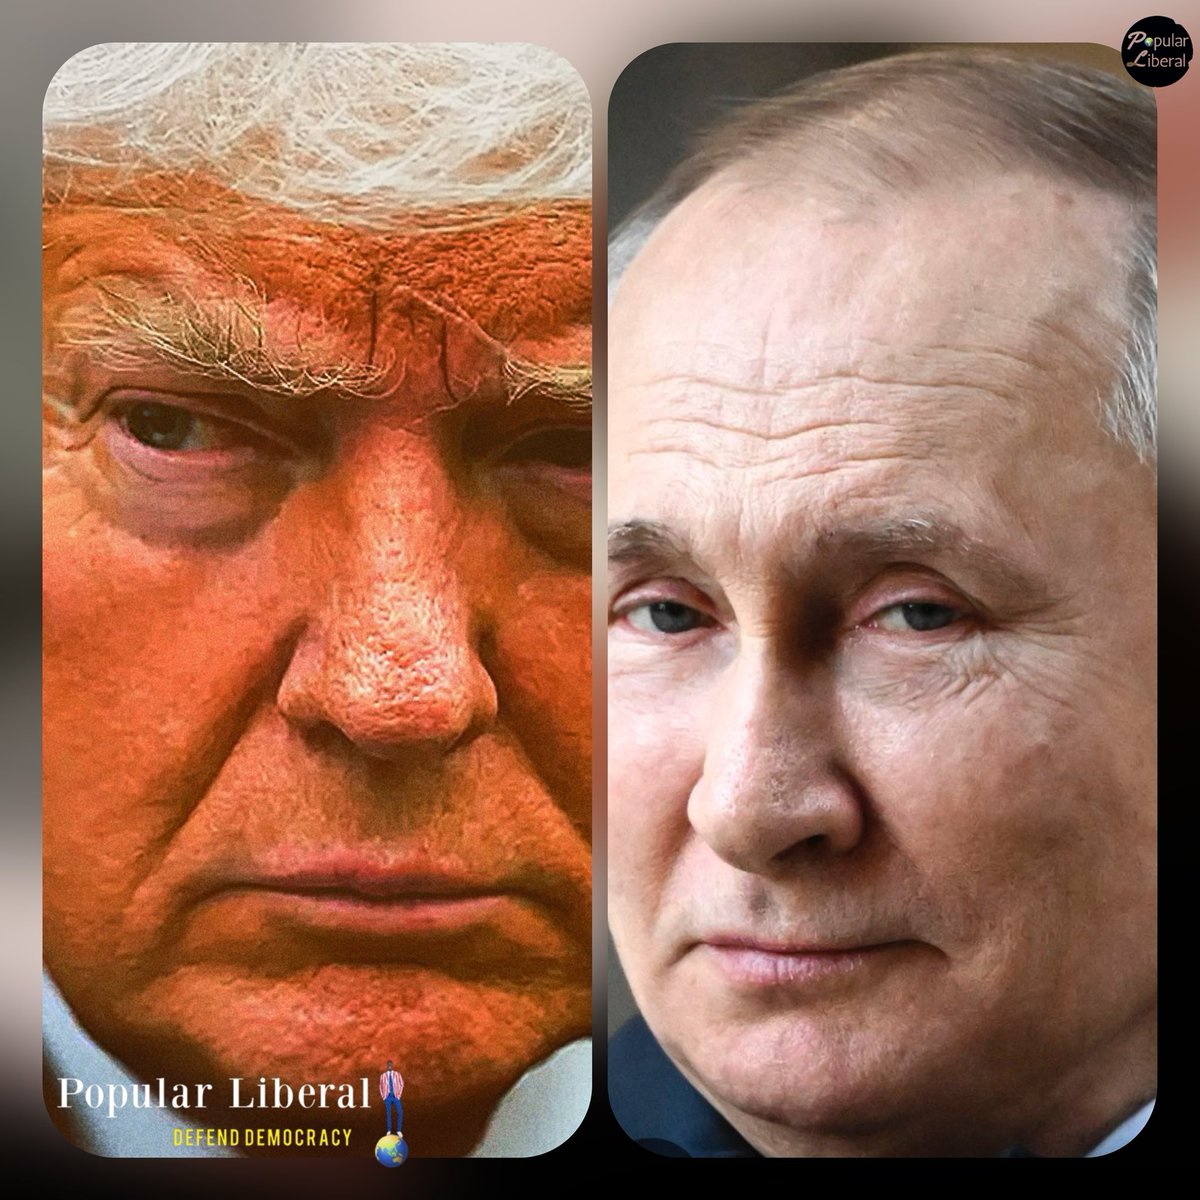 REMINDER FYI: According to former KGB spy Yuri Shvets, Donald Trump was influenced by Russia for more than 40 years. Shvets draws comparisons to the infamous spy ring 'the Cambridge Five' and claims that Trump echoed anti-Western propaganda. Craig Unger's new book, American…